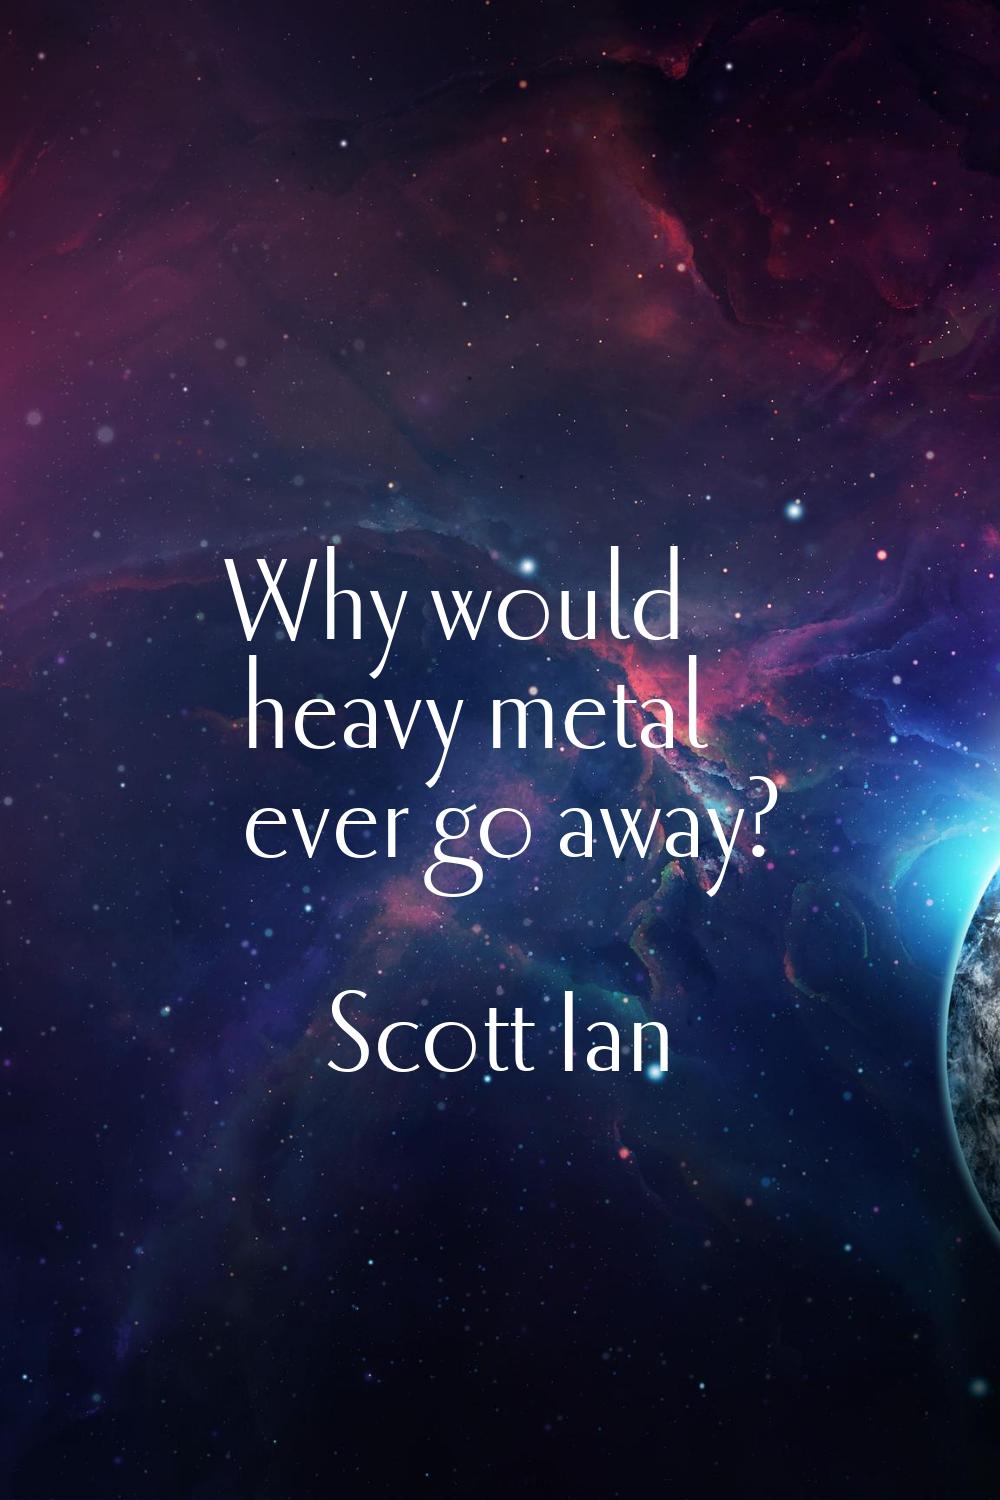 Why would heavy metal ever go away?